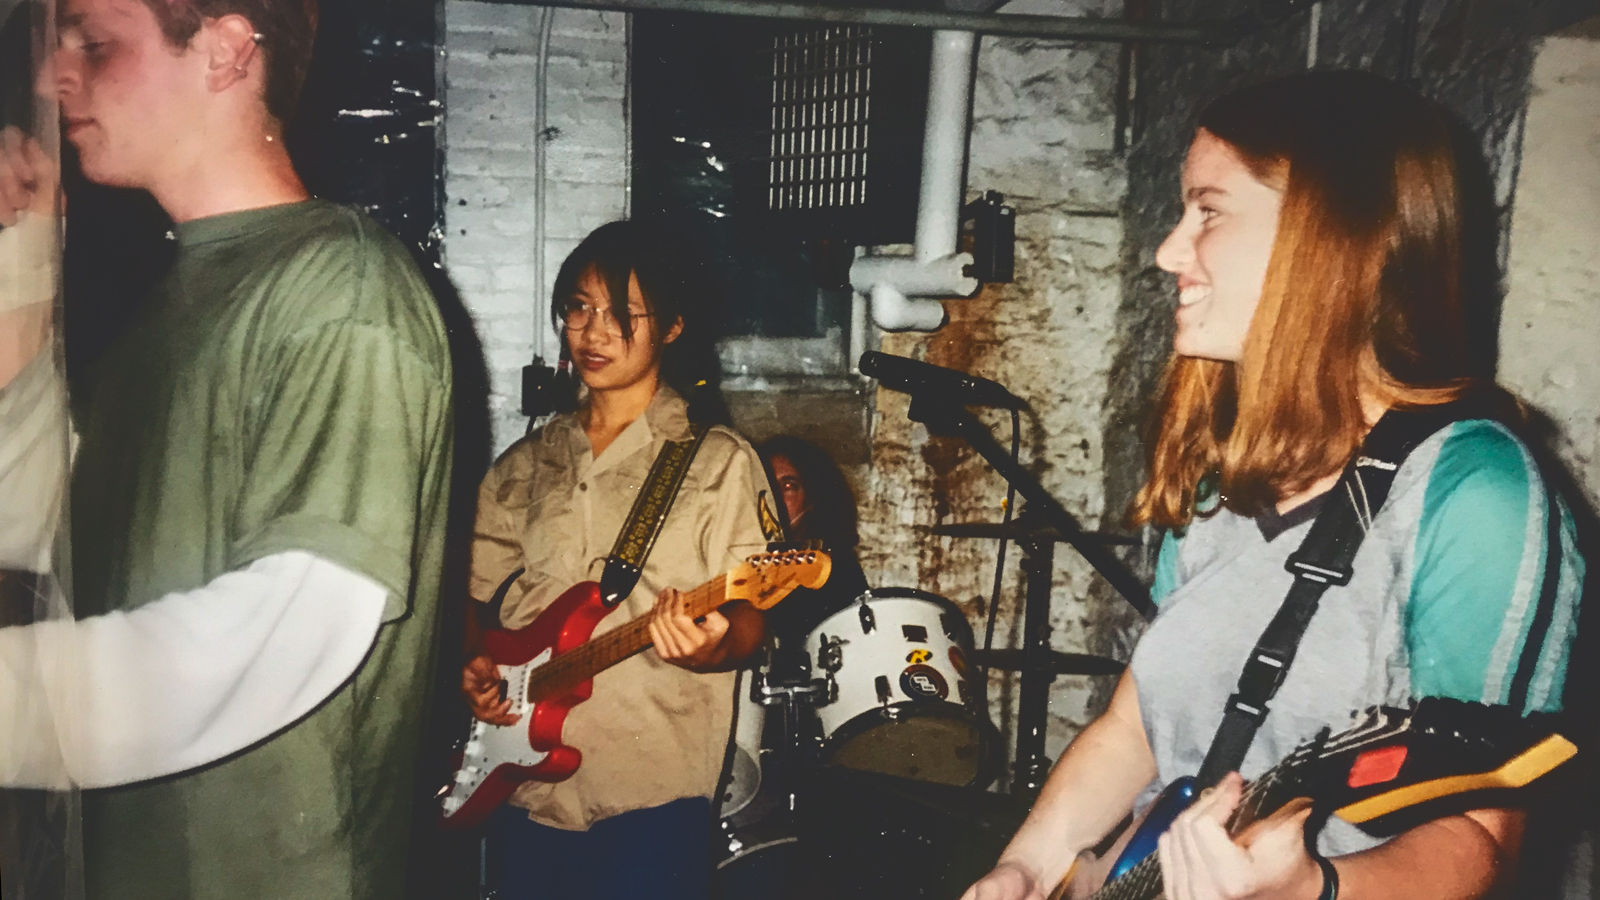 Two women and a man performing in a punk rock group.